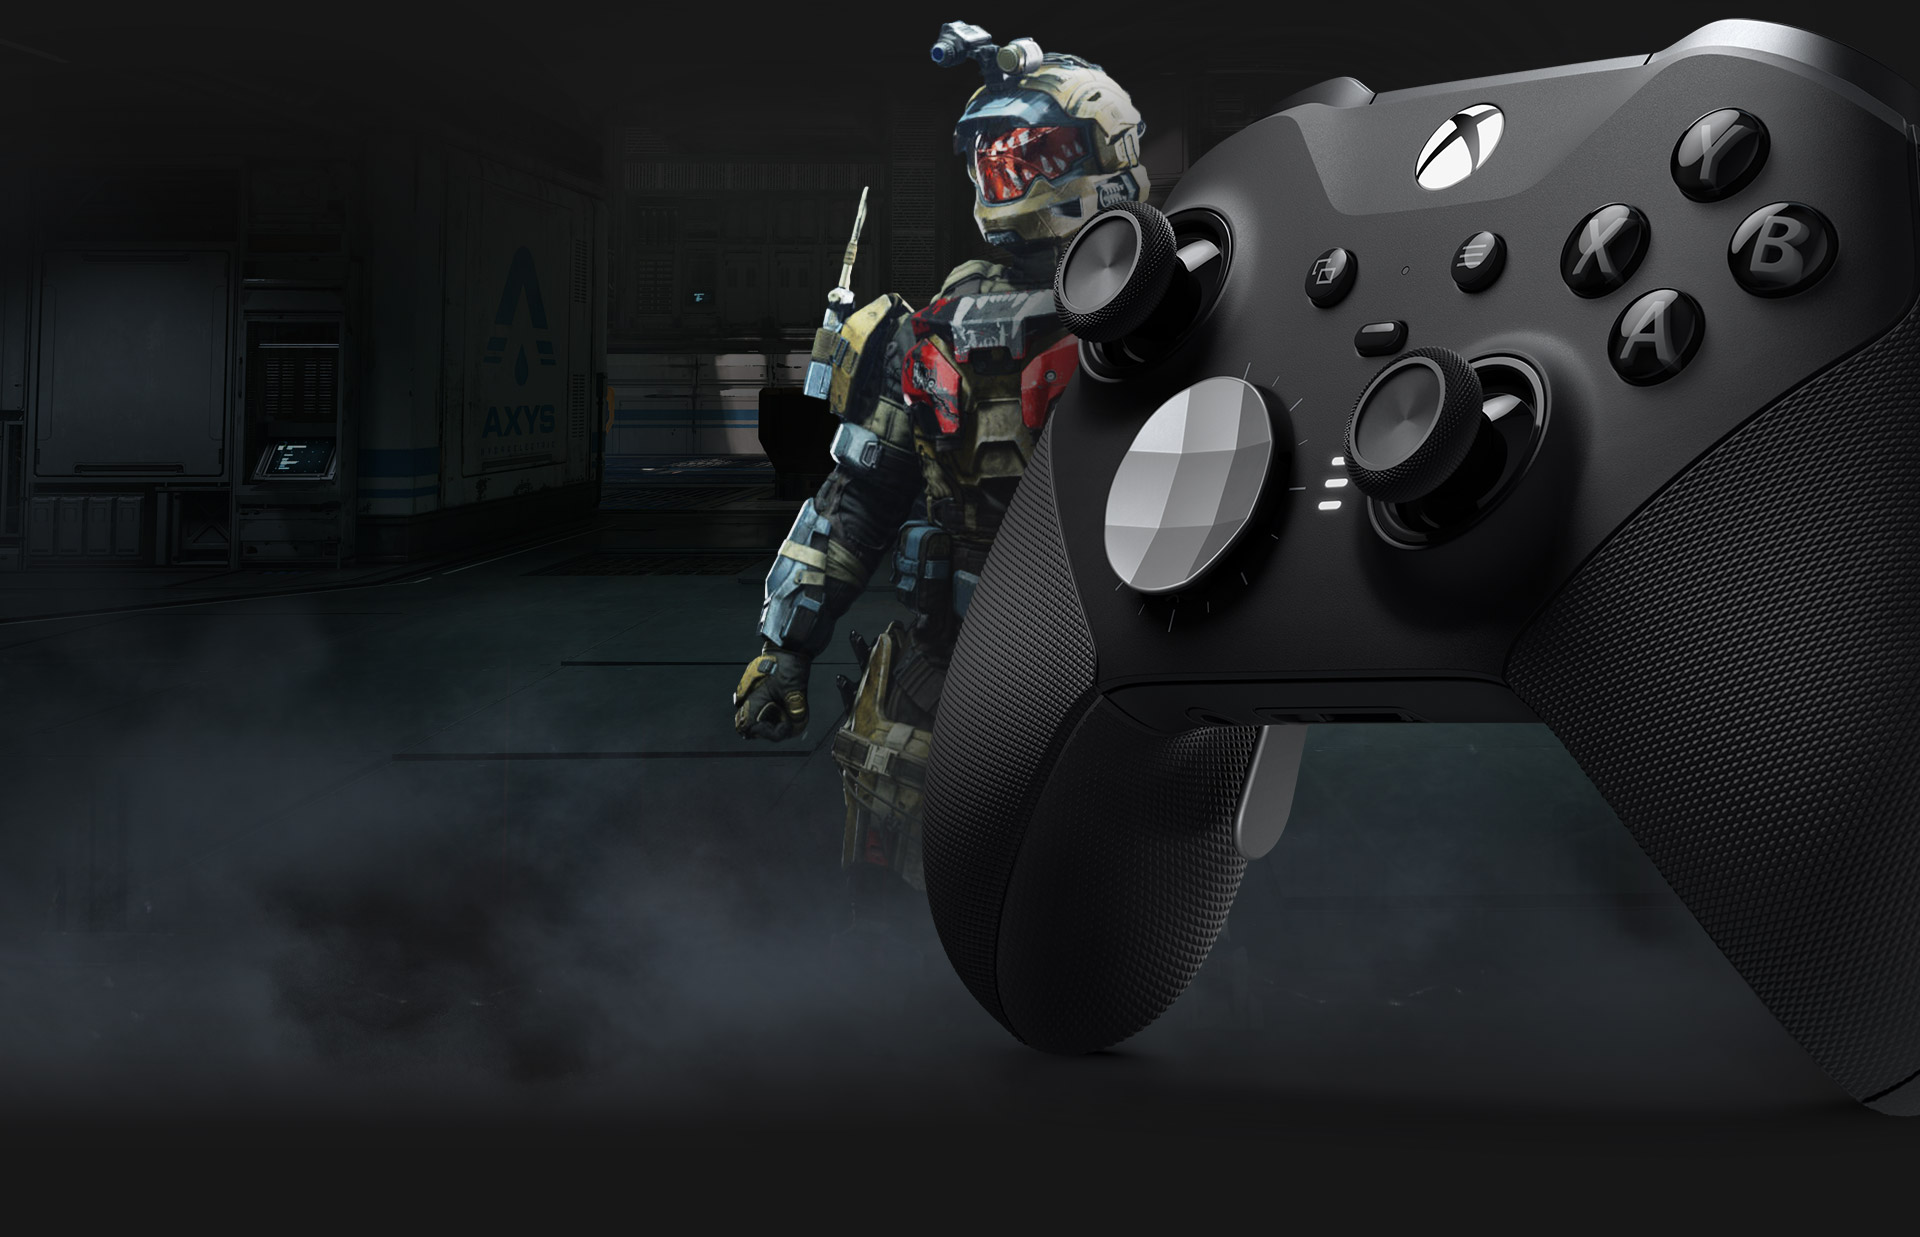 Front left angle of the Xbox Elite Wireless Controller Series 2 in front of a Spartan from Halo Infinite.